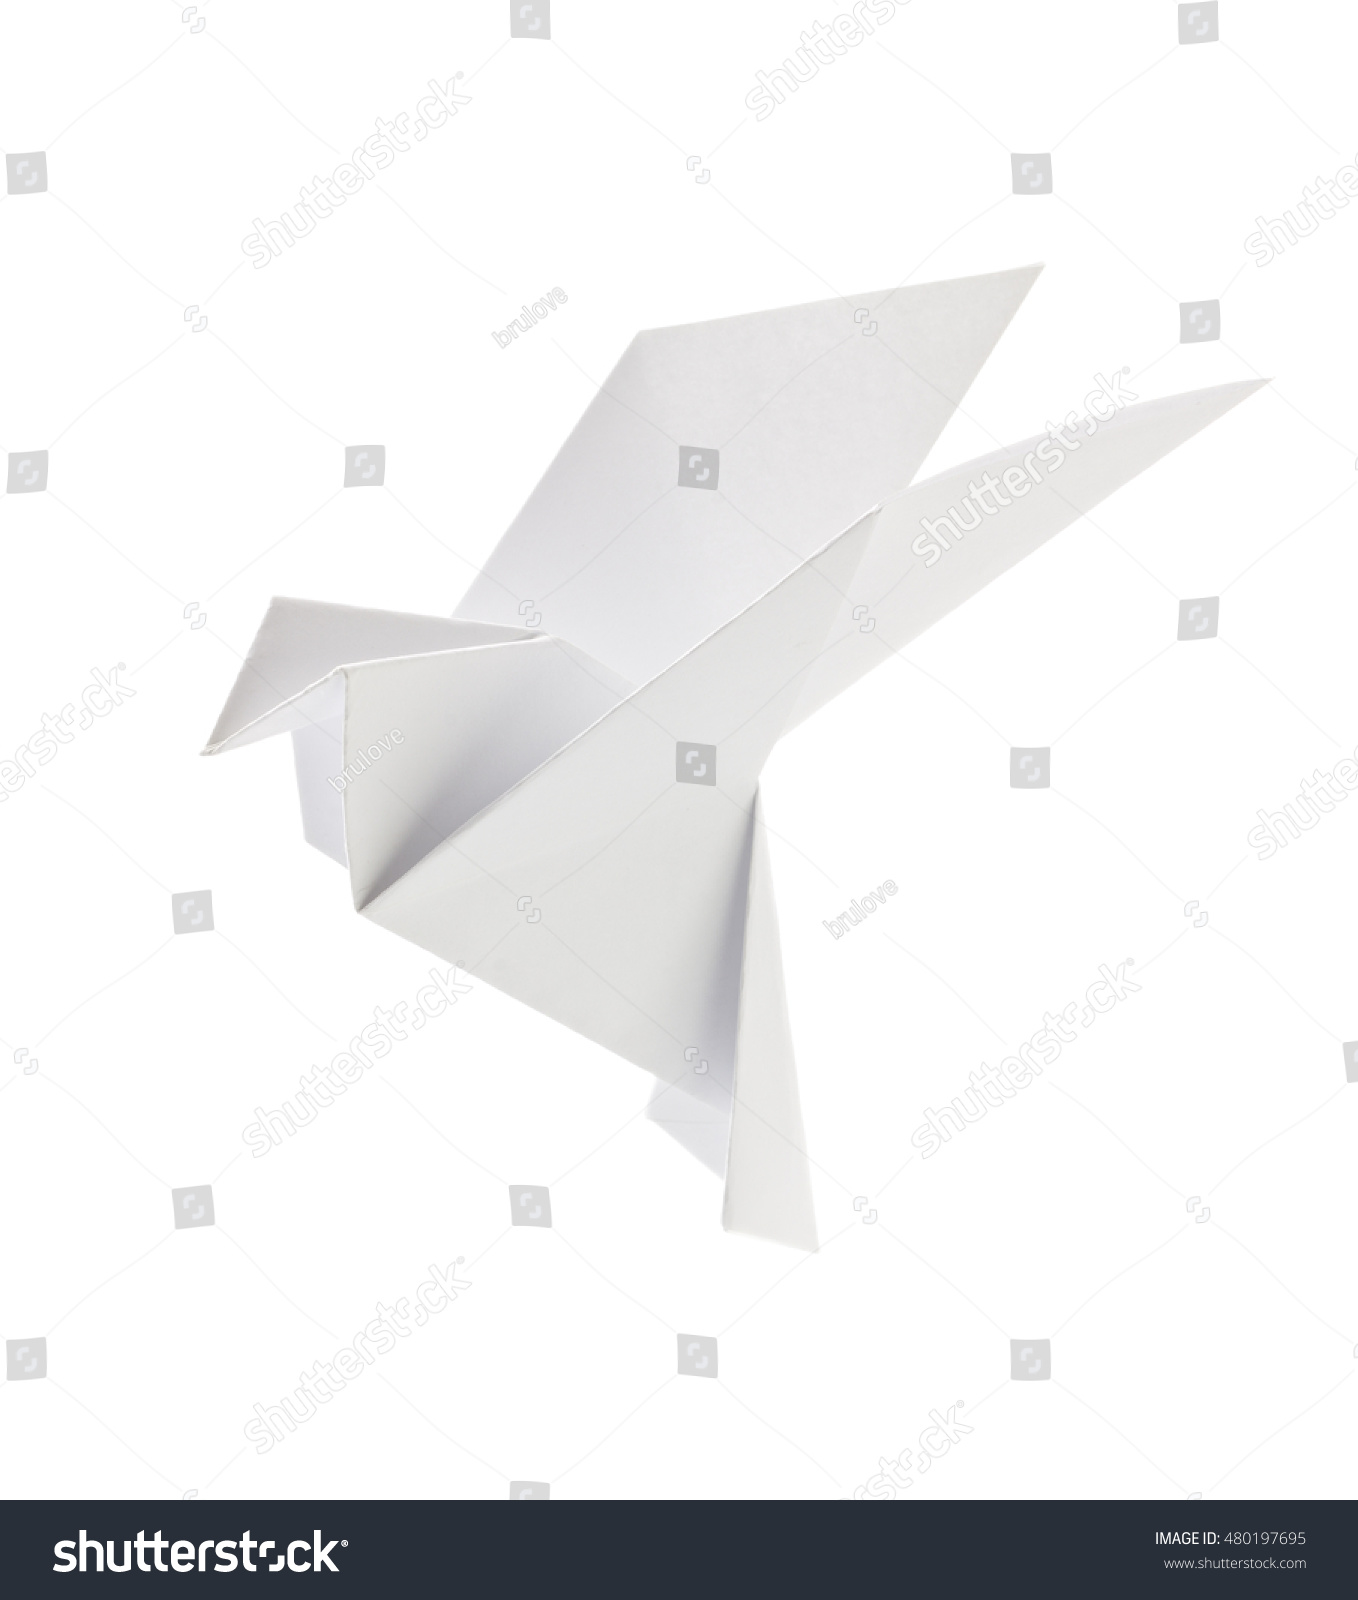 White pigeon of origami. Isolated on background #480197695